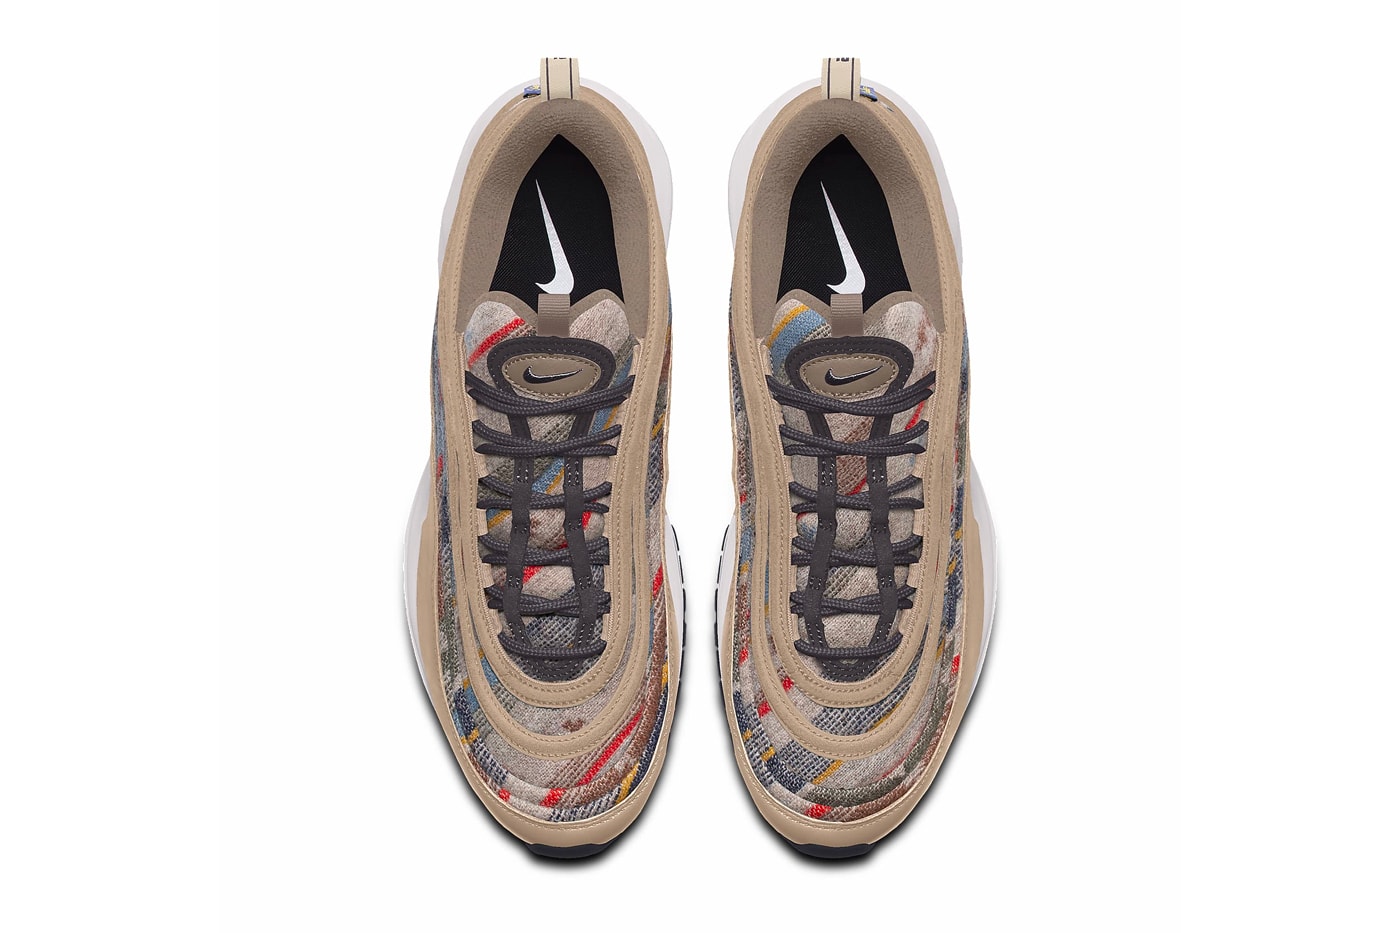 Pendleton Nike By You Air Force 1 Air Max 97 menswear streetwear footwear kicks runners trainers shoes sneakers fall winter 2020 collection